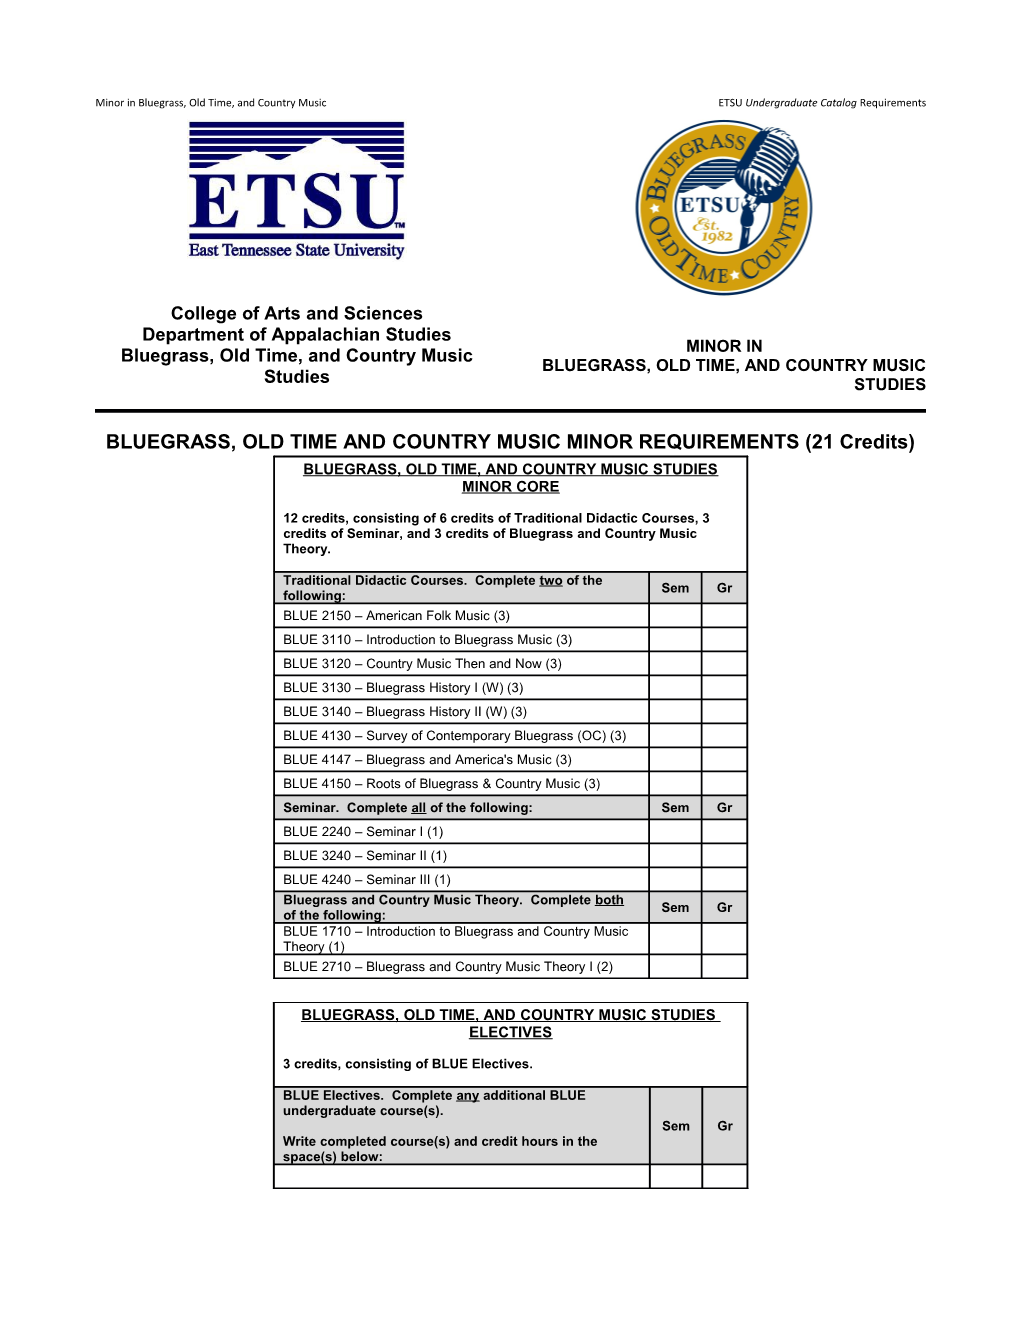 Minor in Bluegrass, Old Time, and Country Music ETSU Undergraduate Catalog Requirements